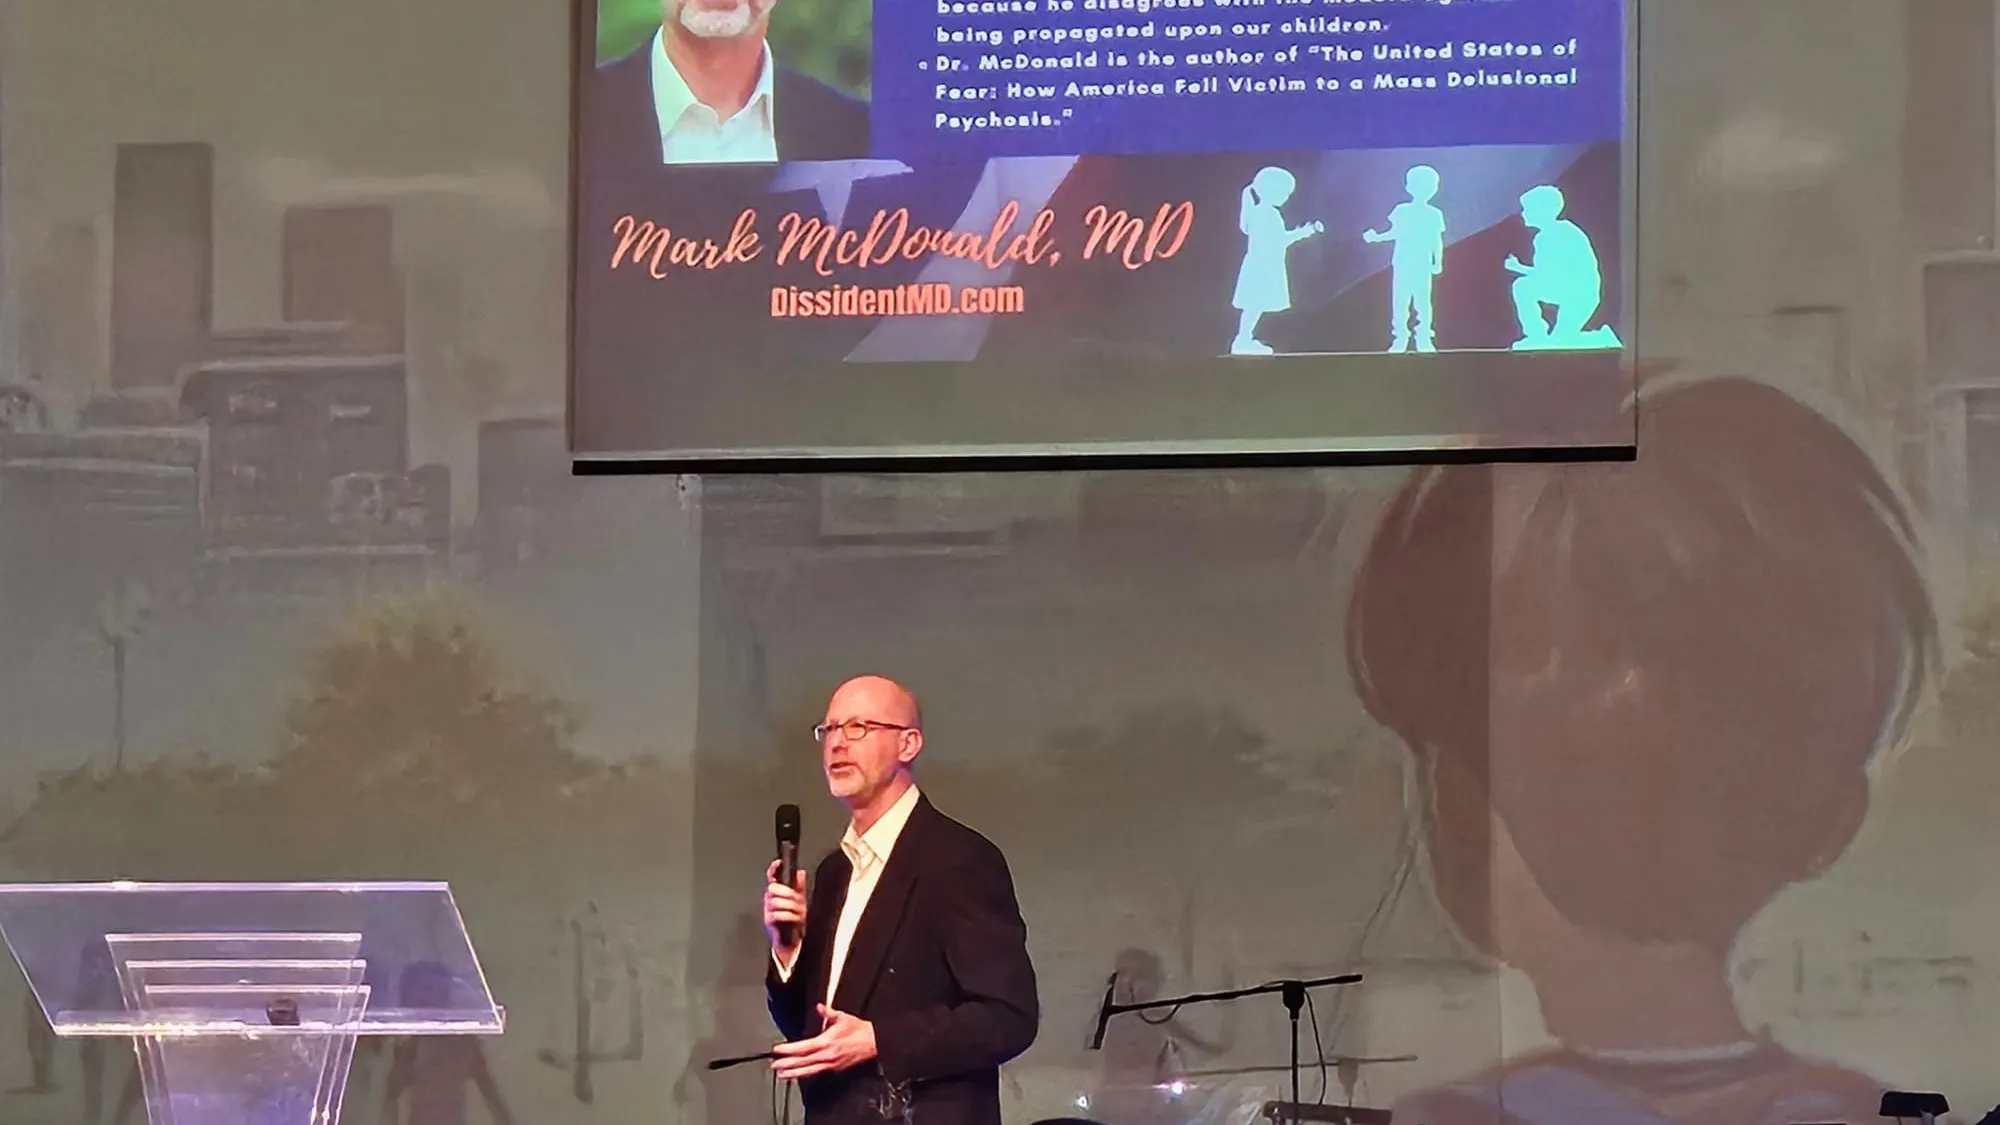 Dr. Mark McDonald on stage with "Save Our Children" in the background